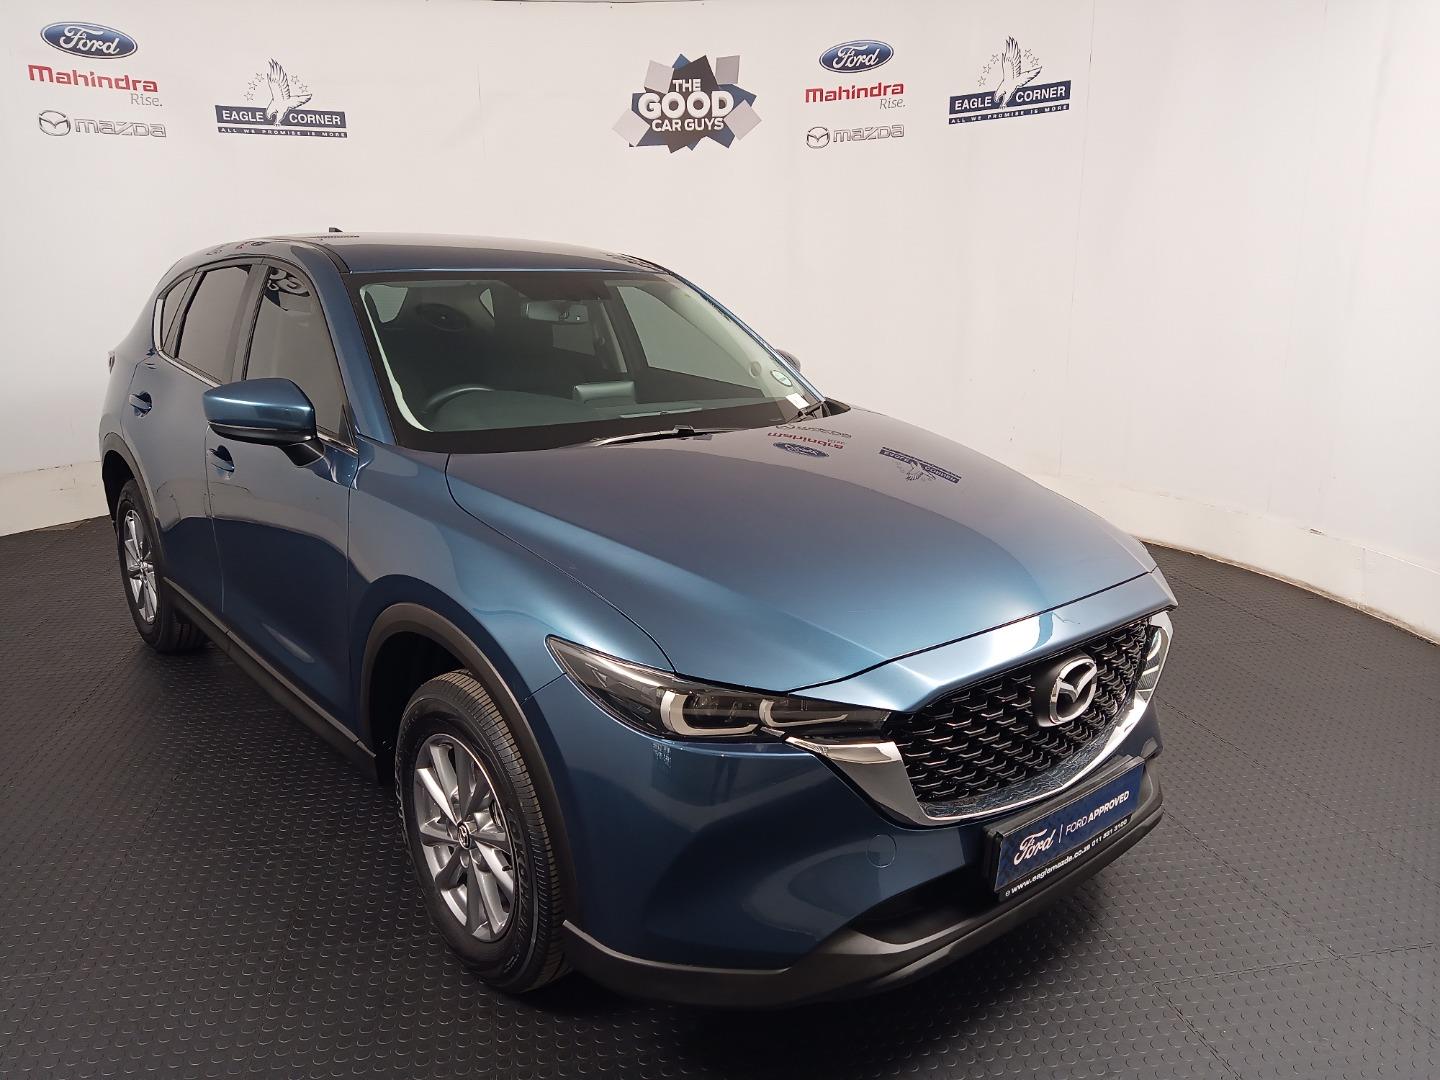 2023 MAZDA CX-5 2.0 ACTIVE A/T For Sale in Gauteng, Mazda